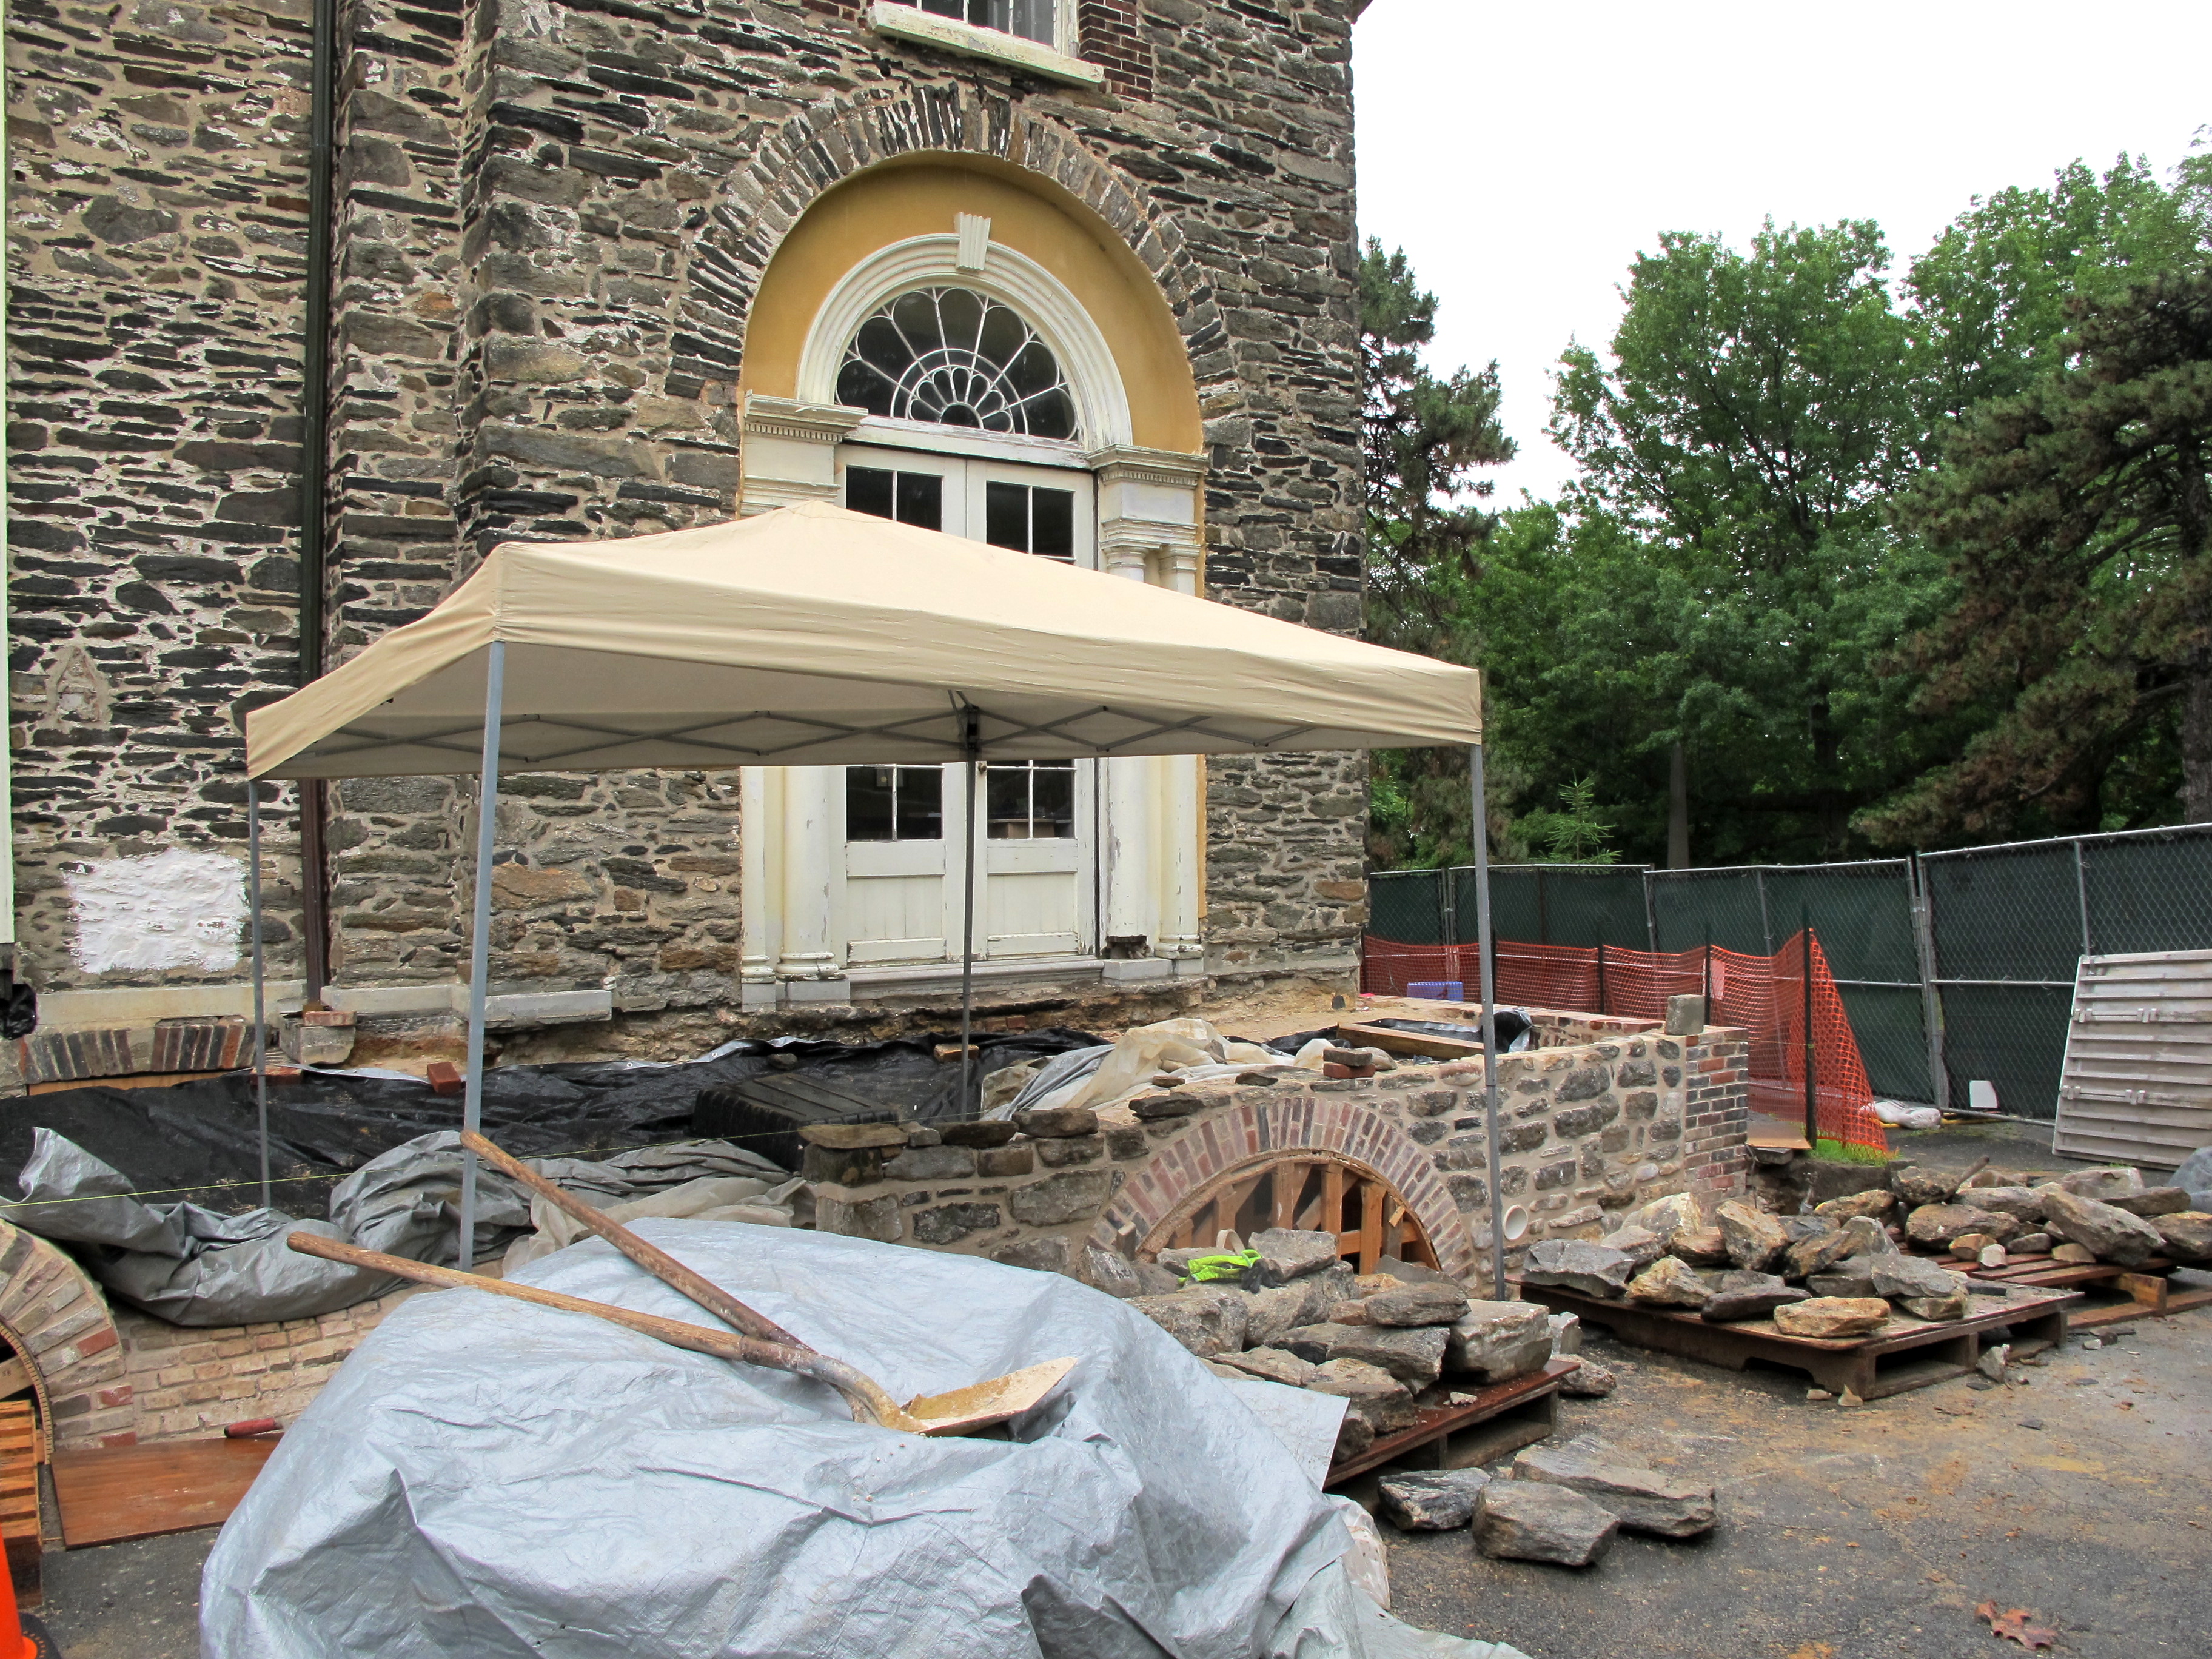 North terrace and cryptoporticus reconstruction underway at The Woodlands, Spring 2015